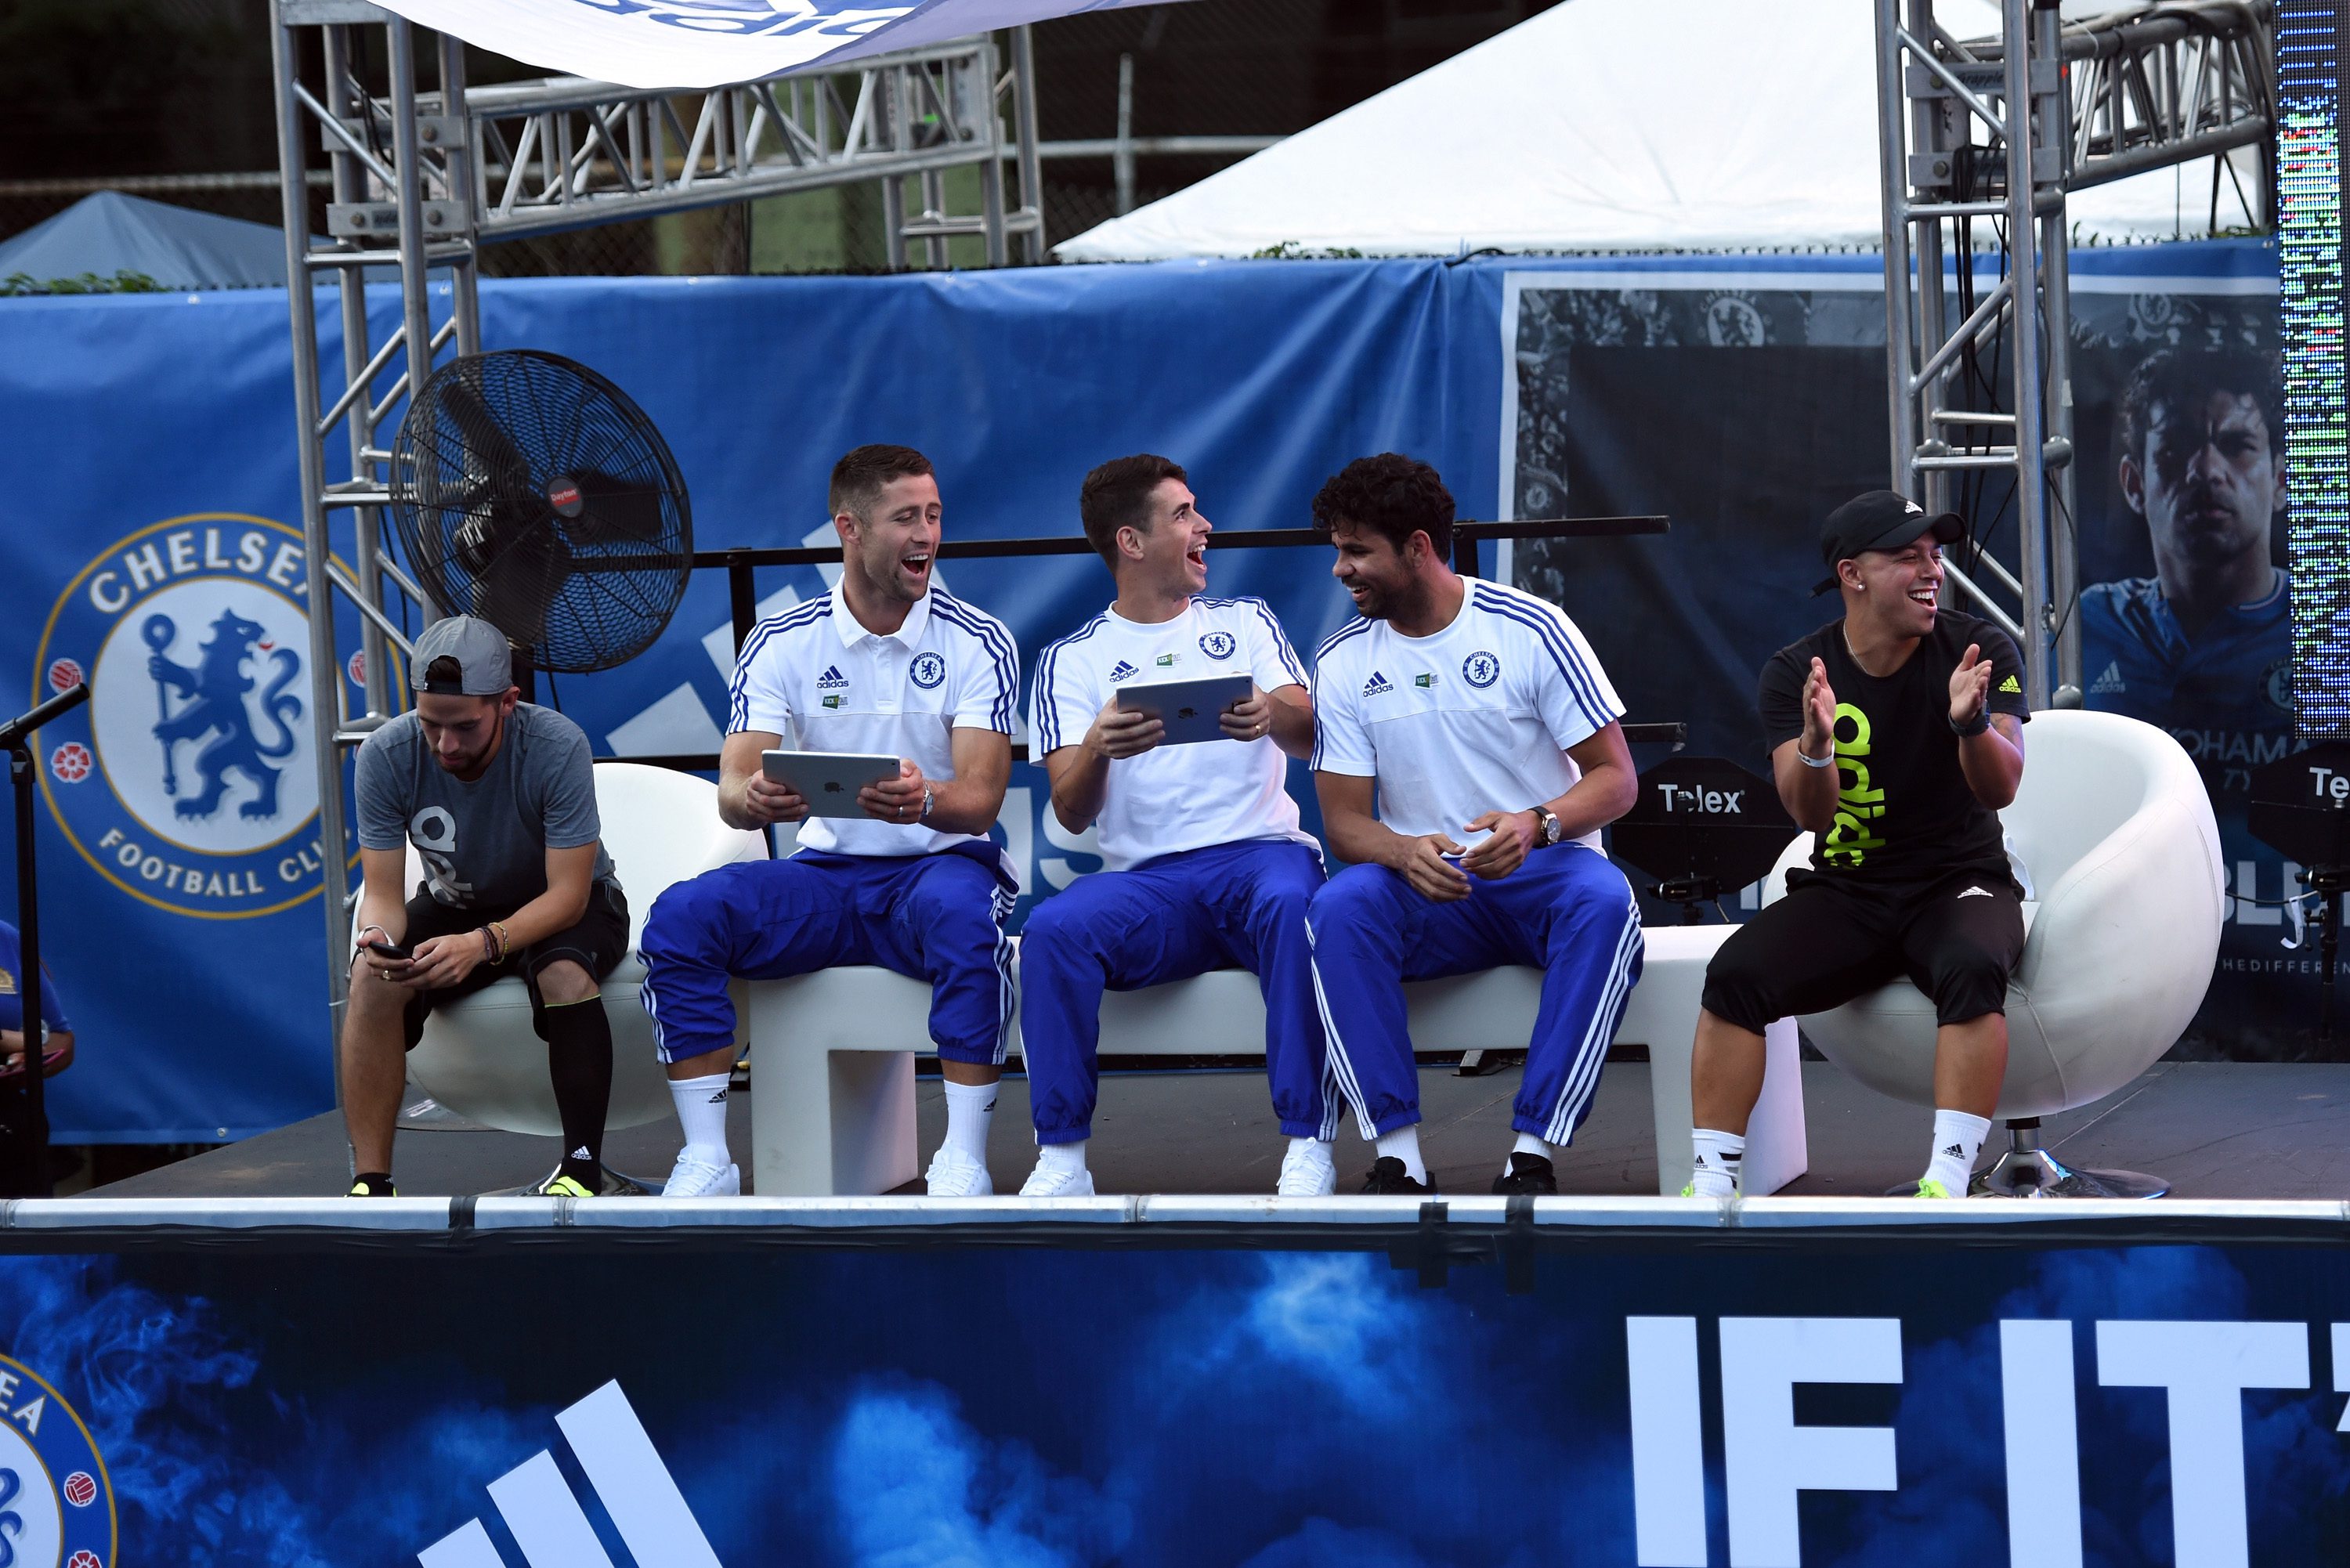 Chelsea's Gary Cahill, Oscar, Diego Costa during the Adidas Be The Difference Event on 21st July 2015 at the FC Harlem Training Ground in Harlem, New York, USA.